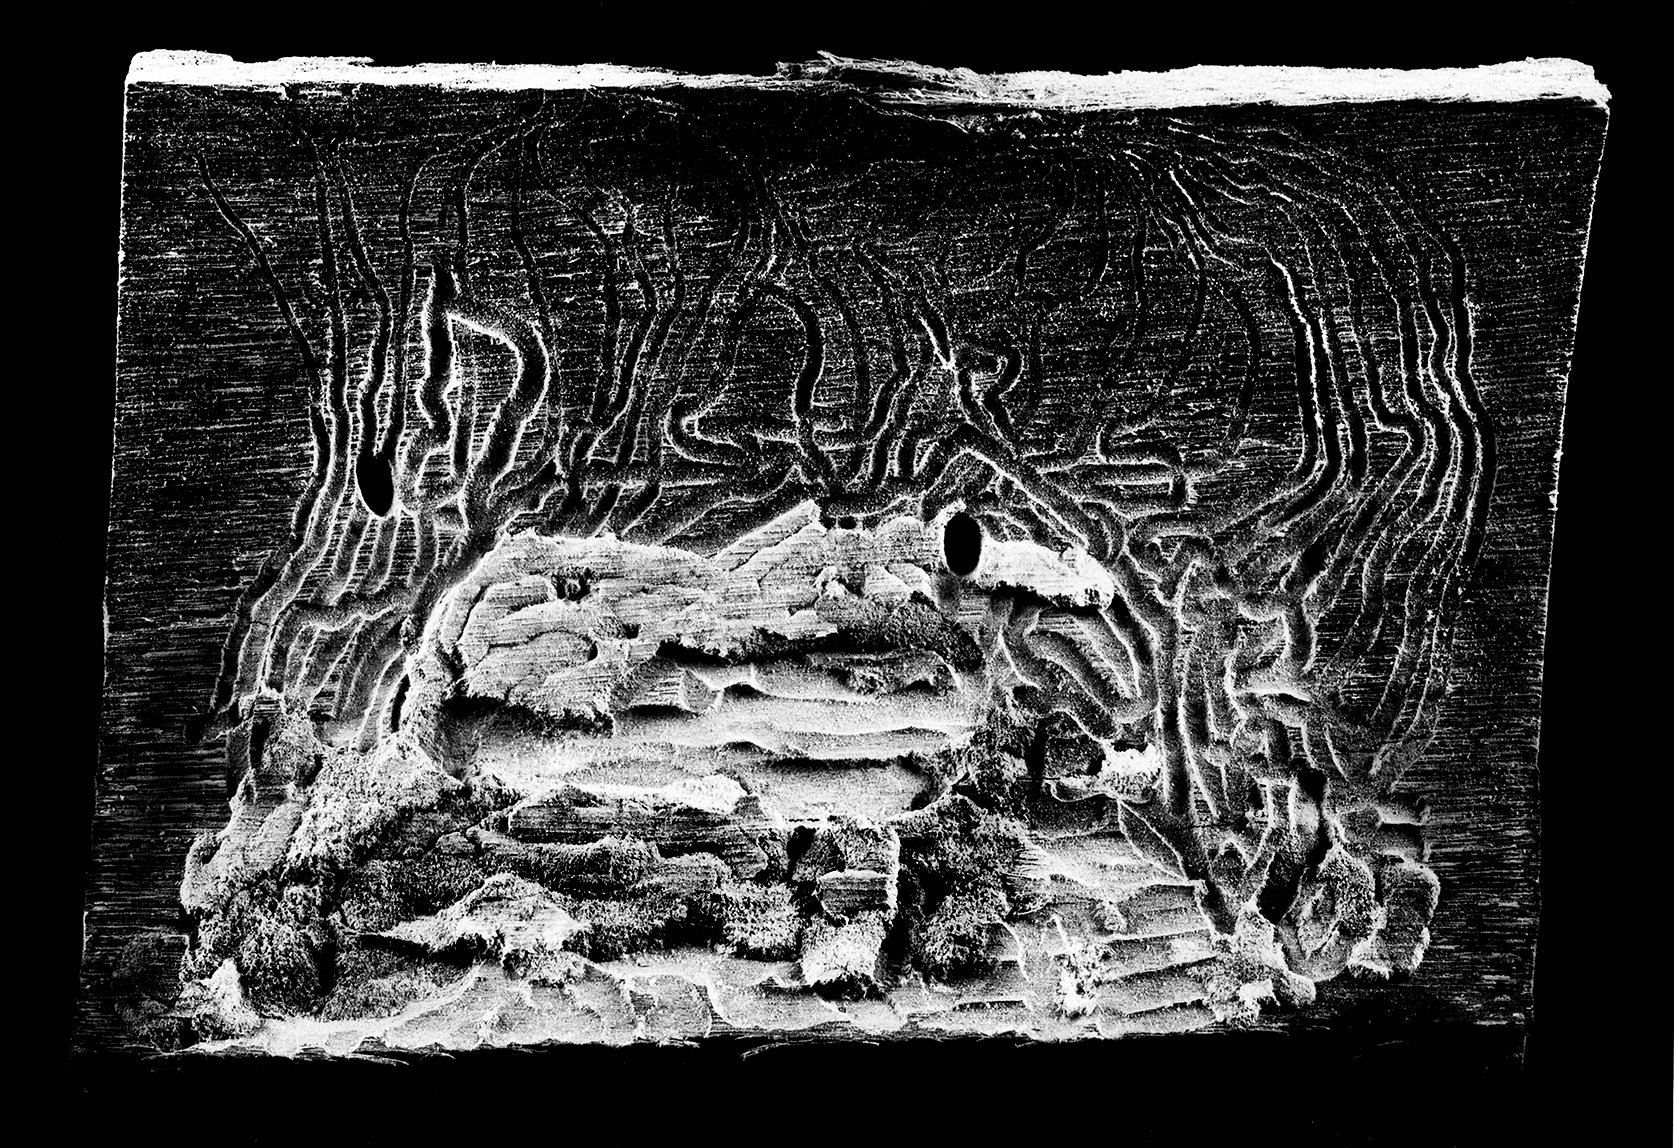    Wonders In The Woods     A Wood-Boring Beetle’s Drawing On Bark #2 , 2013  80cm x 116.5cm Archival pigment print 